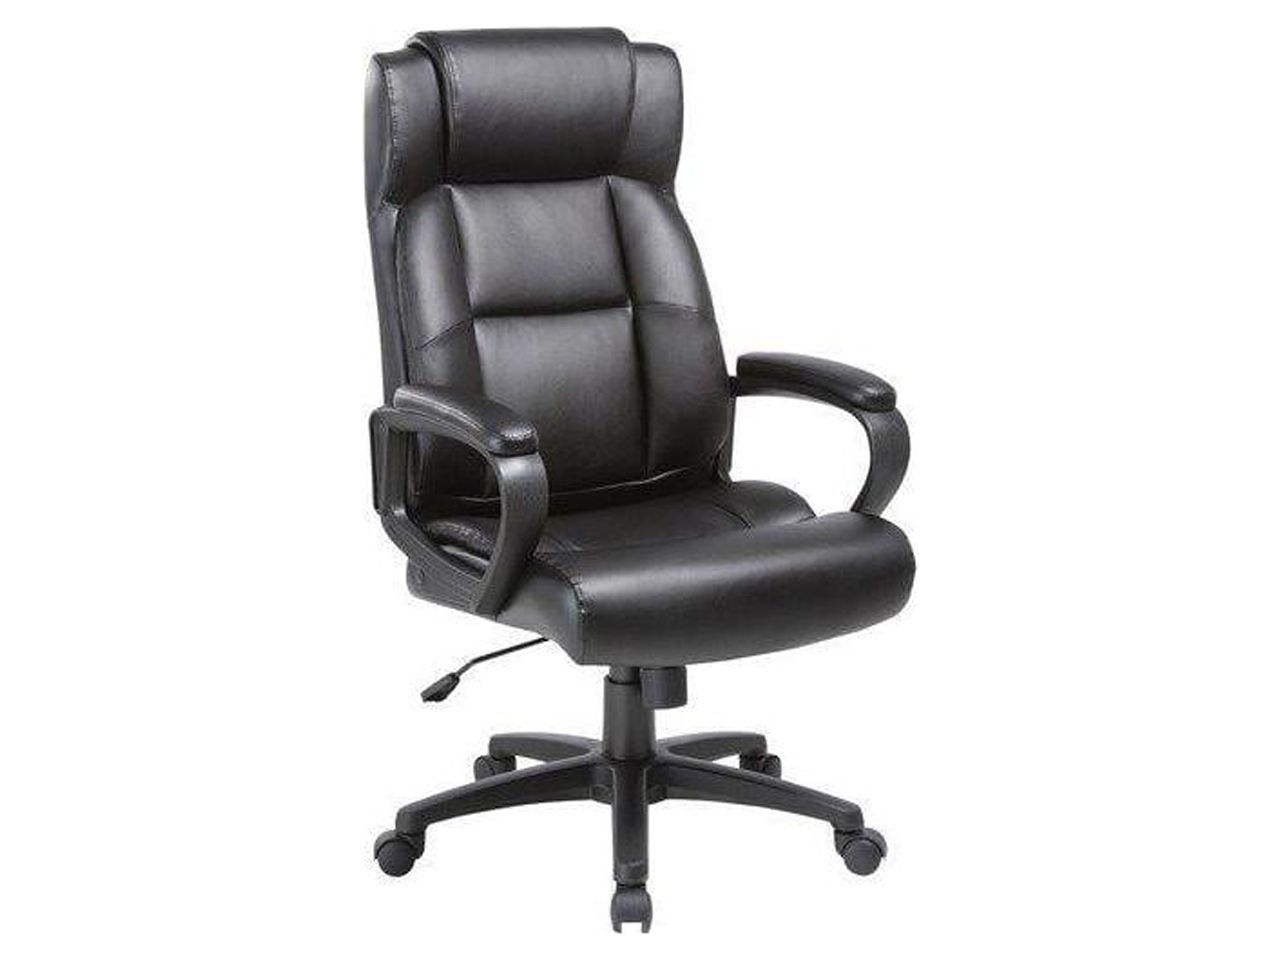 Lorell Soho High-back Leather Executive Chair - Black Bonded Leather Seat - Black Bonded Leather Back - 5-star Base - 18.39" Seat Width - 28.5" Length x 29" Width x 28" Depth x 46" Height - 1 Each - image 4 of 7